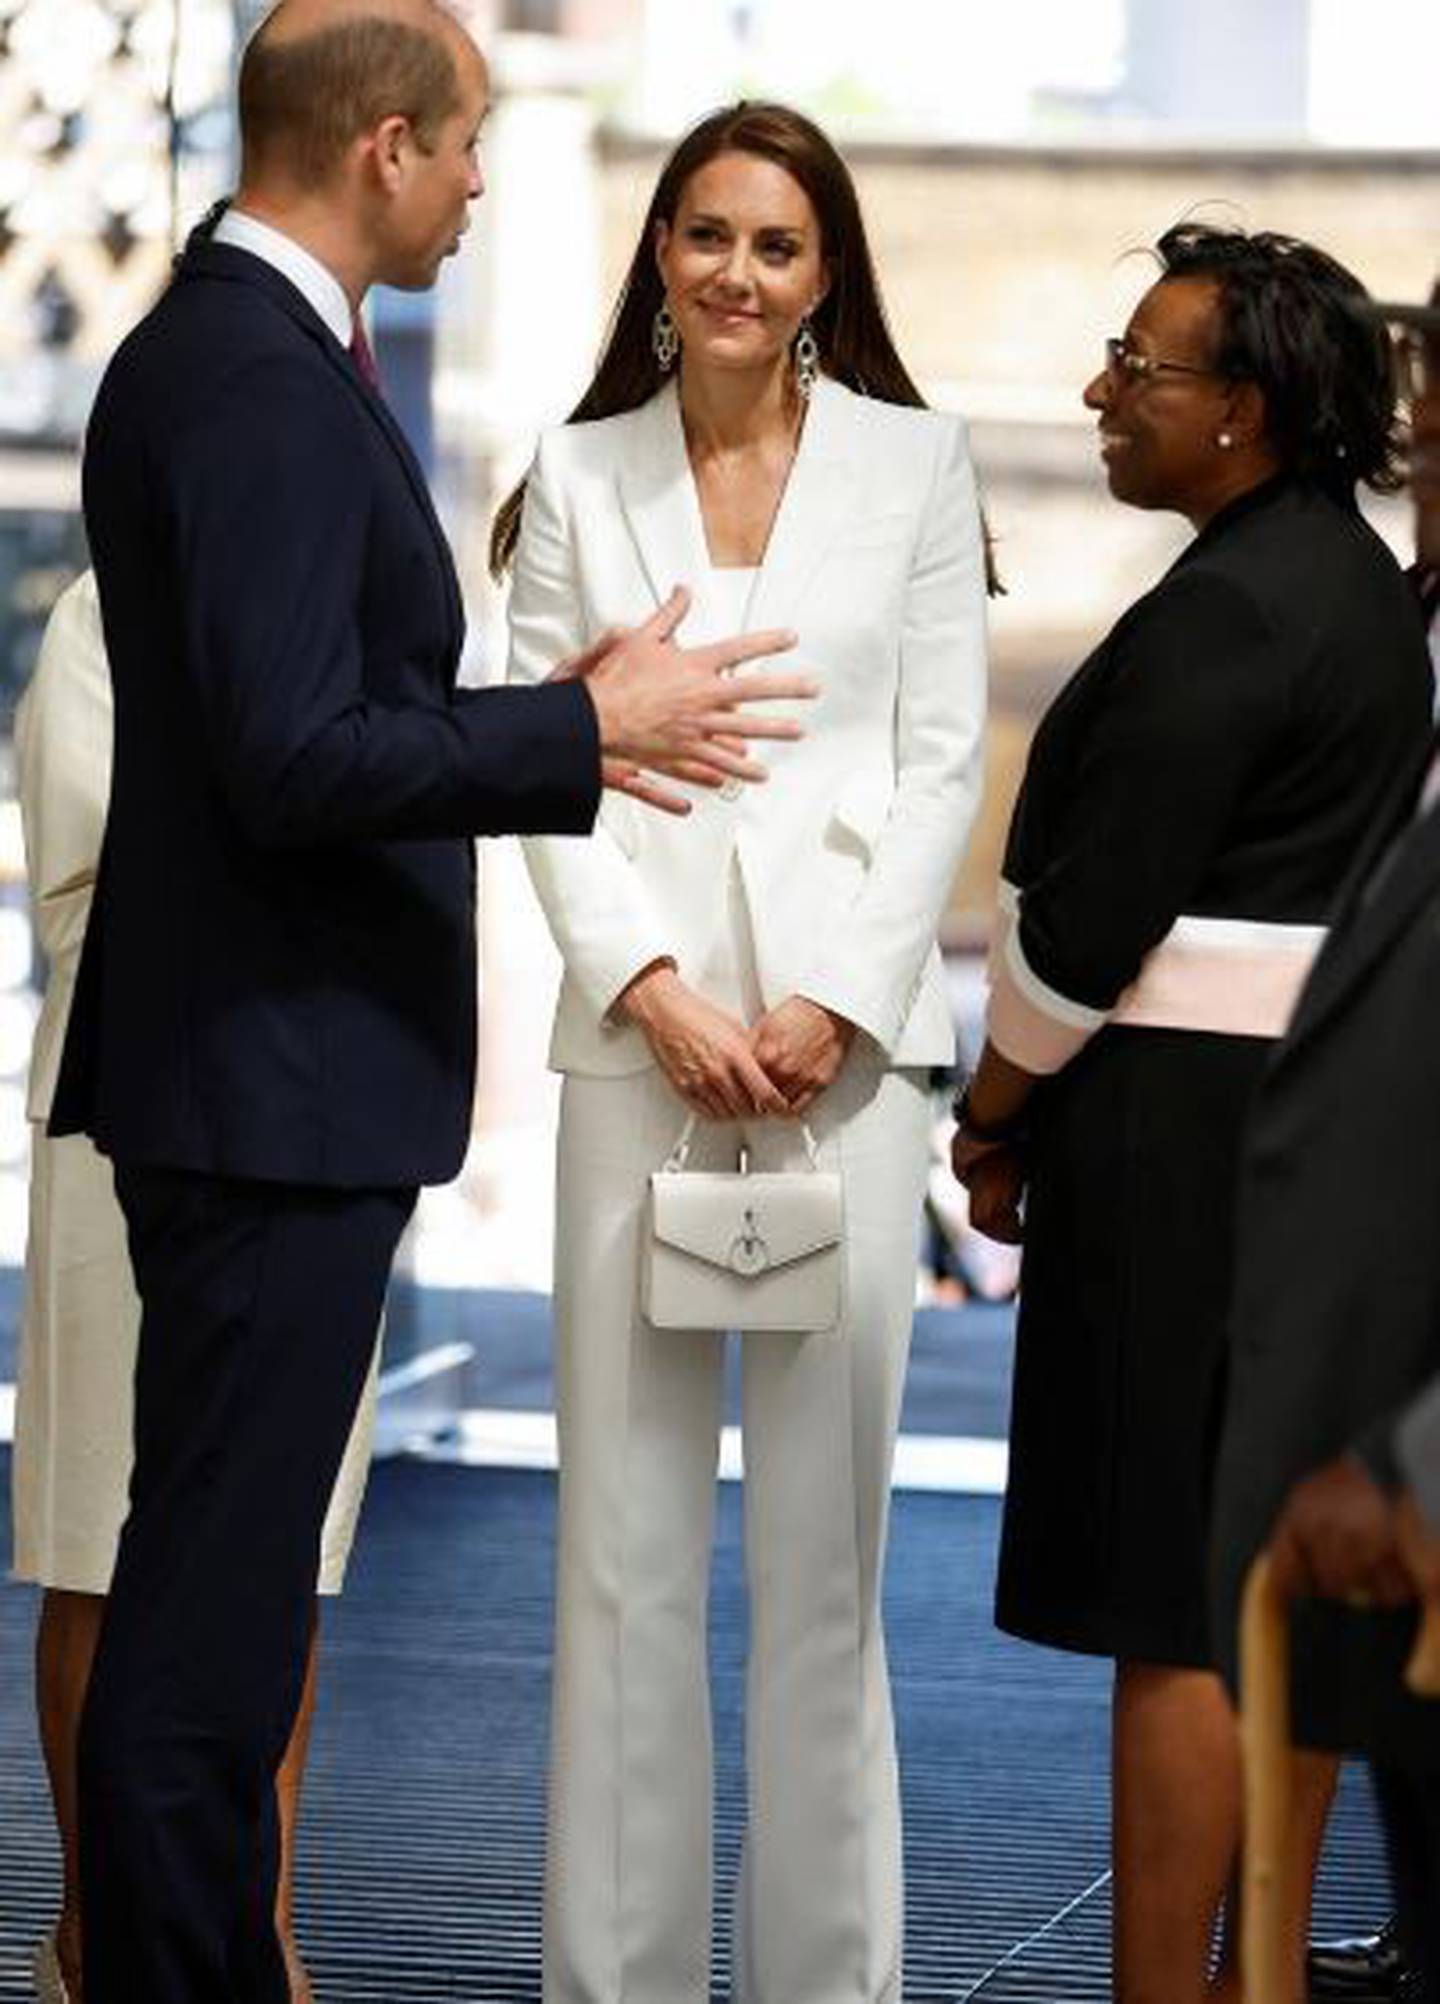 Kate Middleton in a whitе Alexandra McQueen jacket